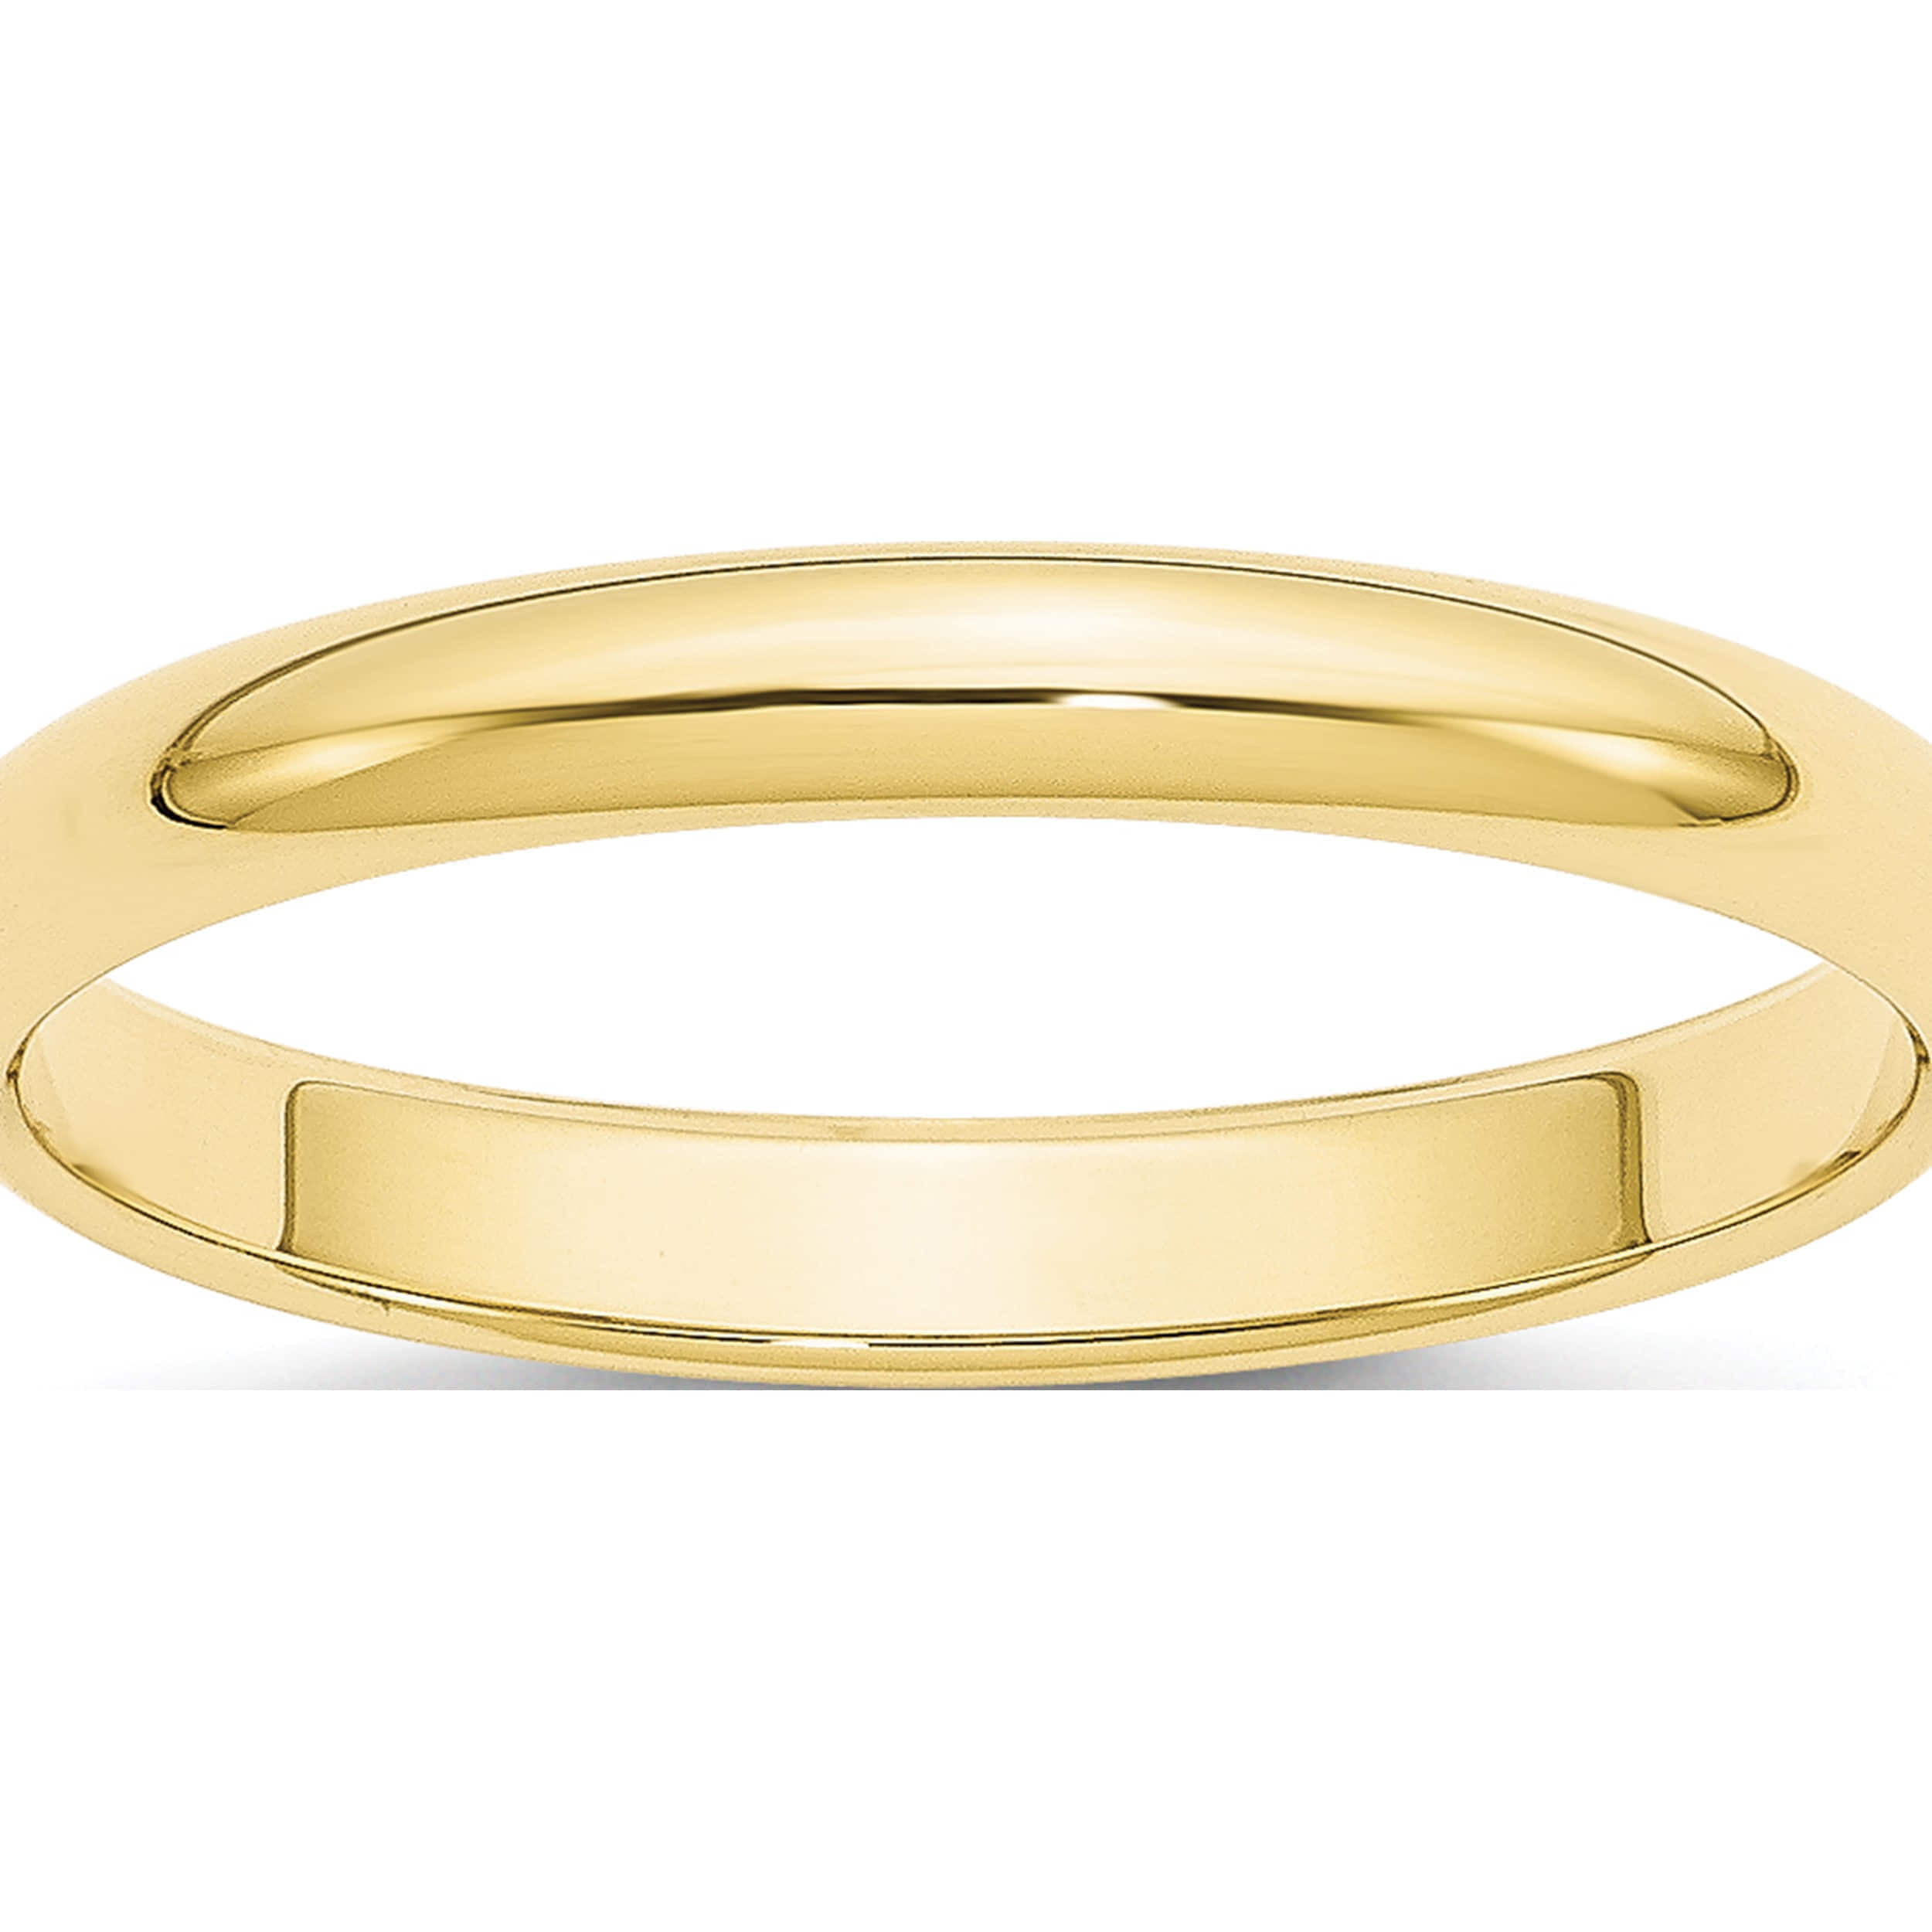 10k Yellow Gold 3mm Milgrain Half Round Band Ring Size 9.5 Fine Jewelry Ideal Gifts For Women